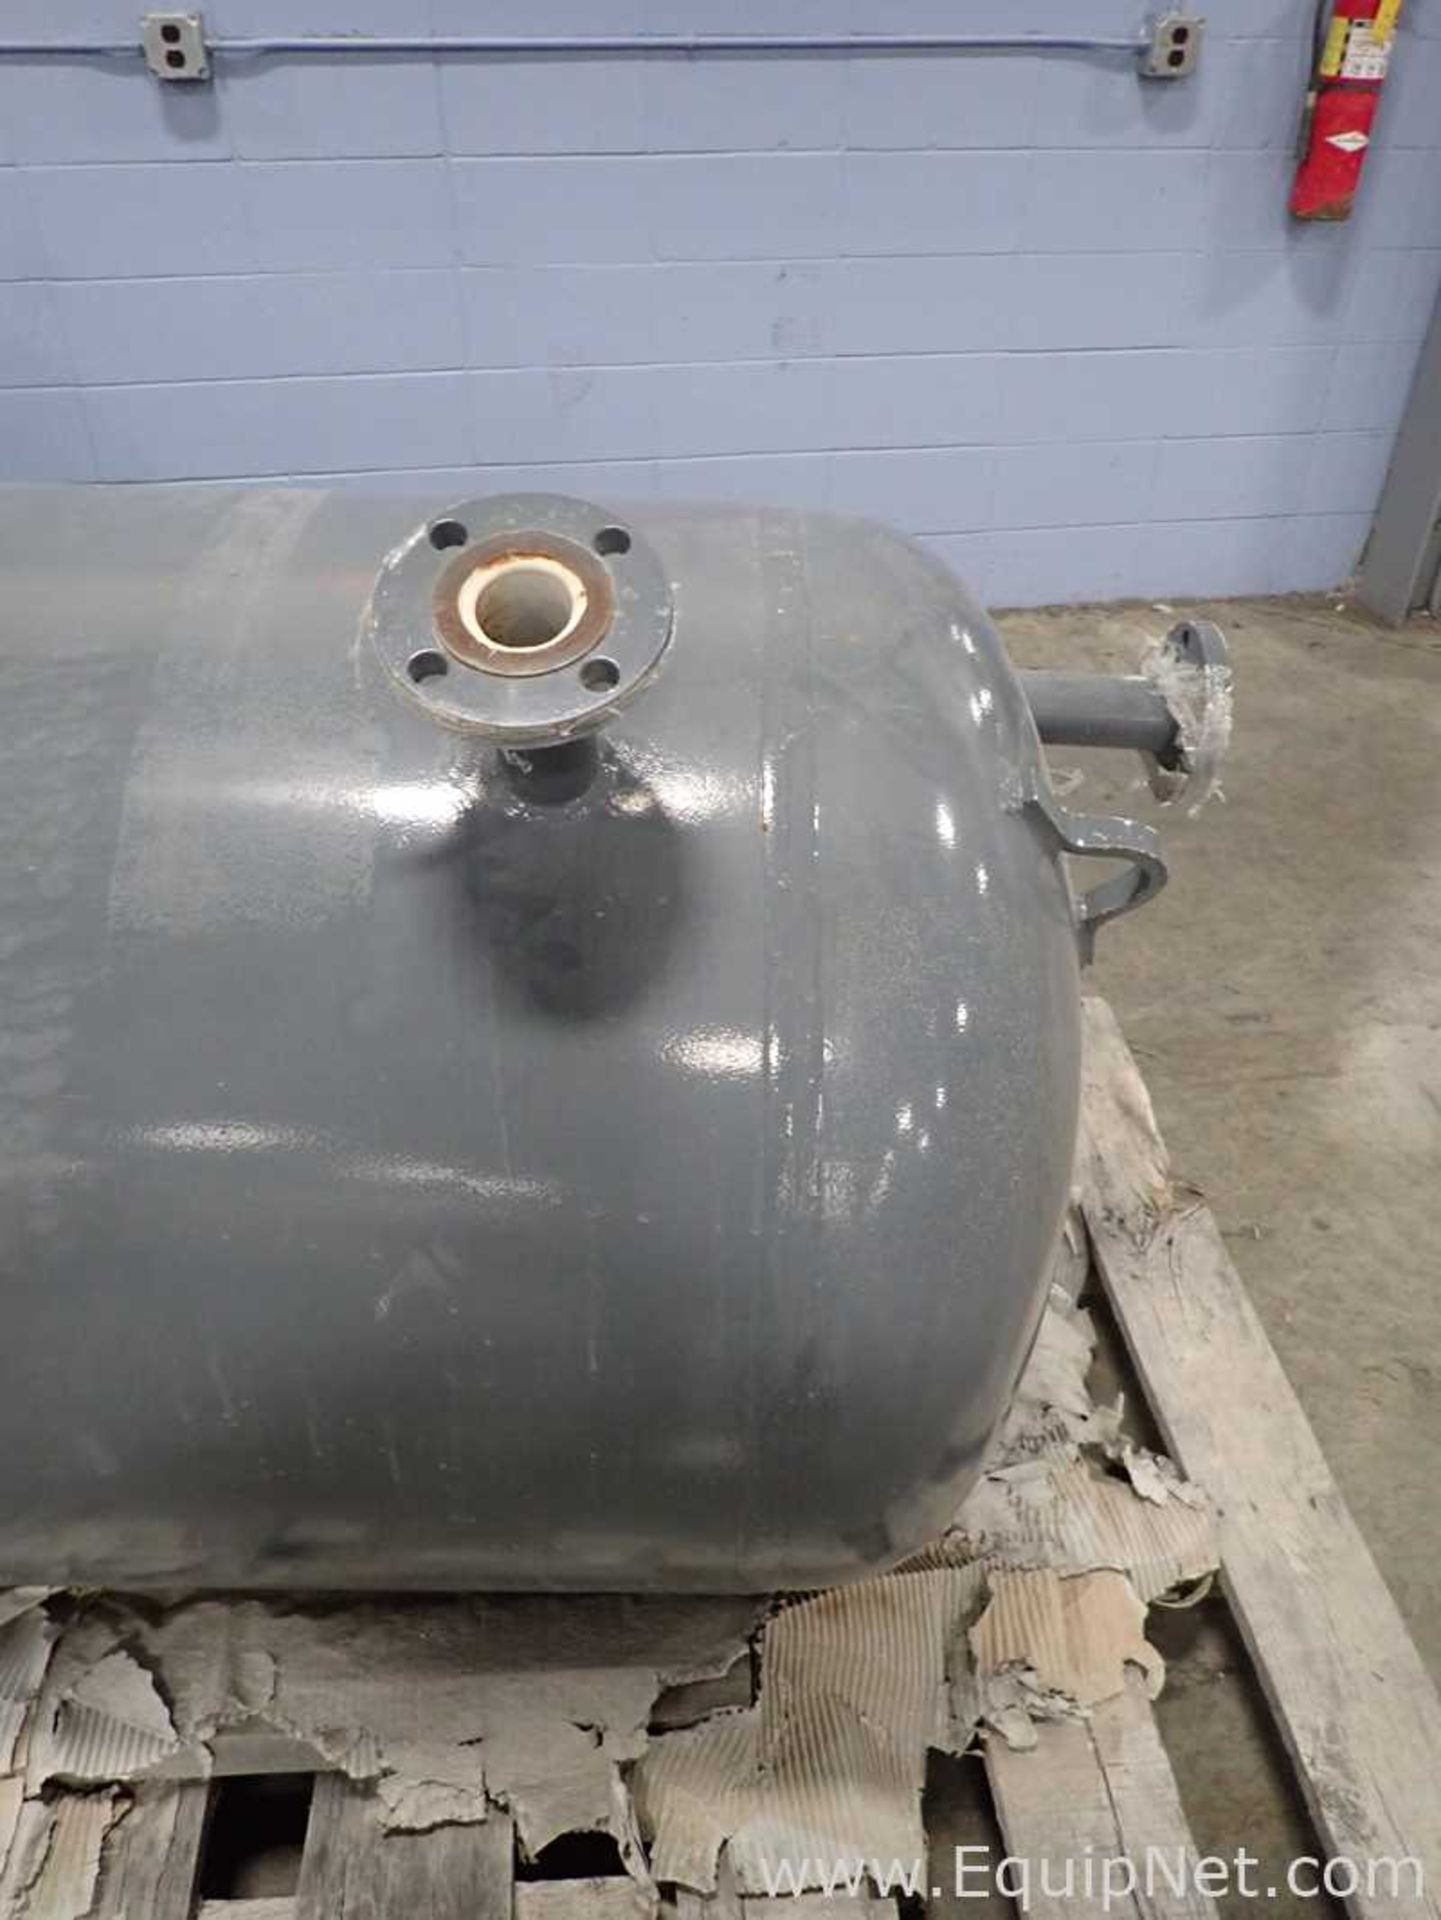 EQUIPNET LISTING #765750; REMOVAL COST: $40; DESCRIPTION: Steel Fab Carbon Steel Receiving Tank - Image 2 of 8